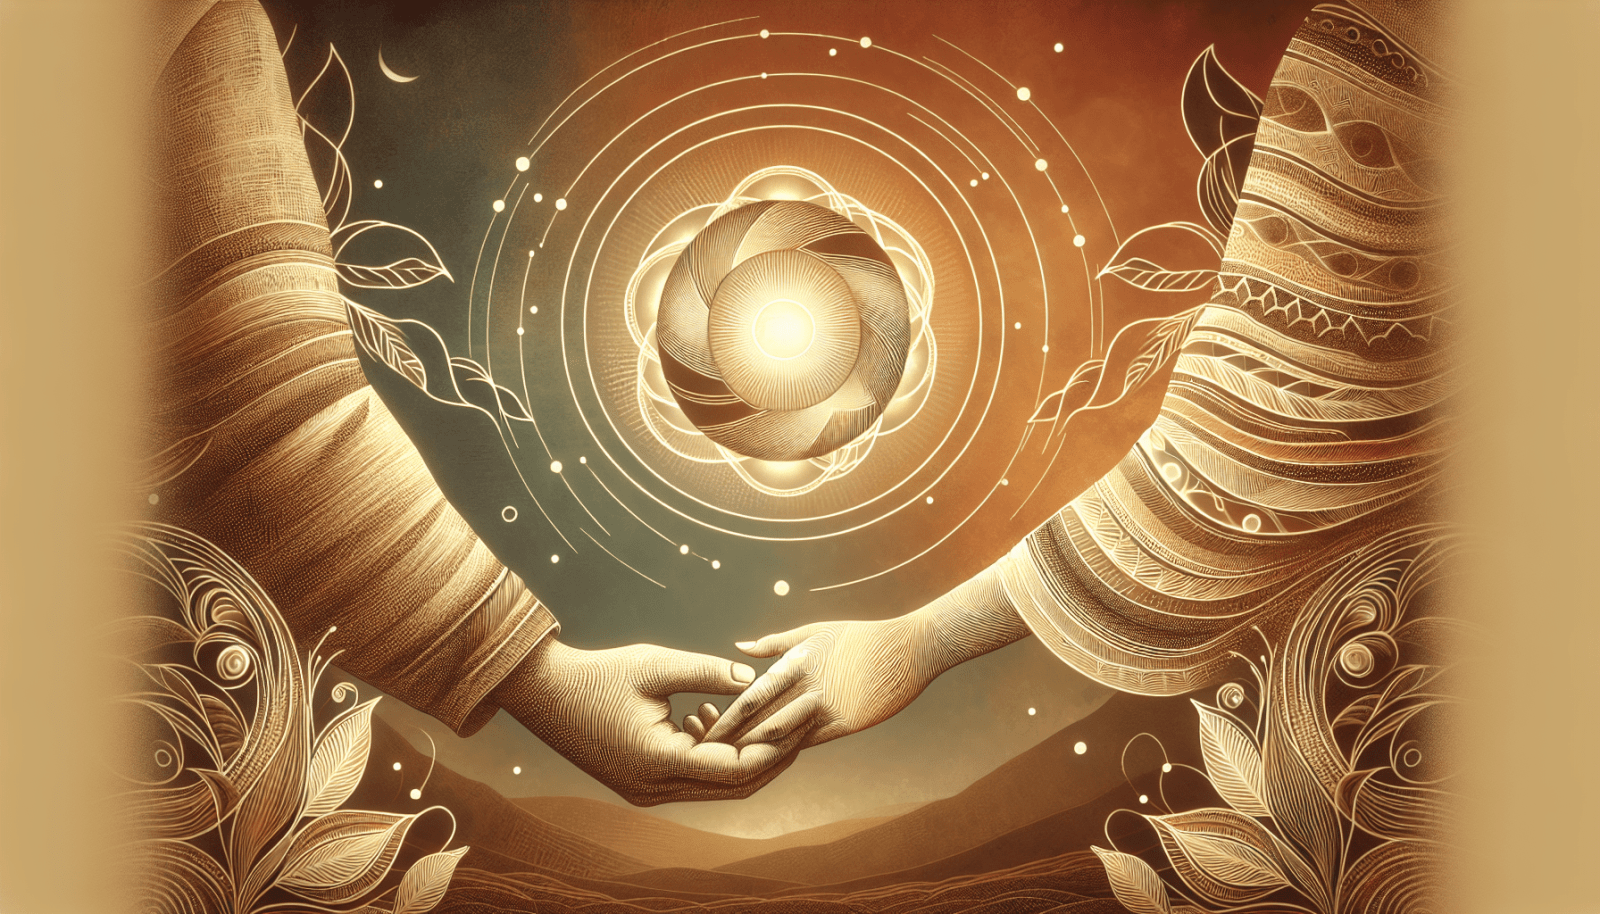 Illustration of two highly detailed hands in a warm, sepia-toned color palette reaching towards each other with an intricate cosmic flower design at the center emitting circular energy waves, set against a stylized landscape and sky background.